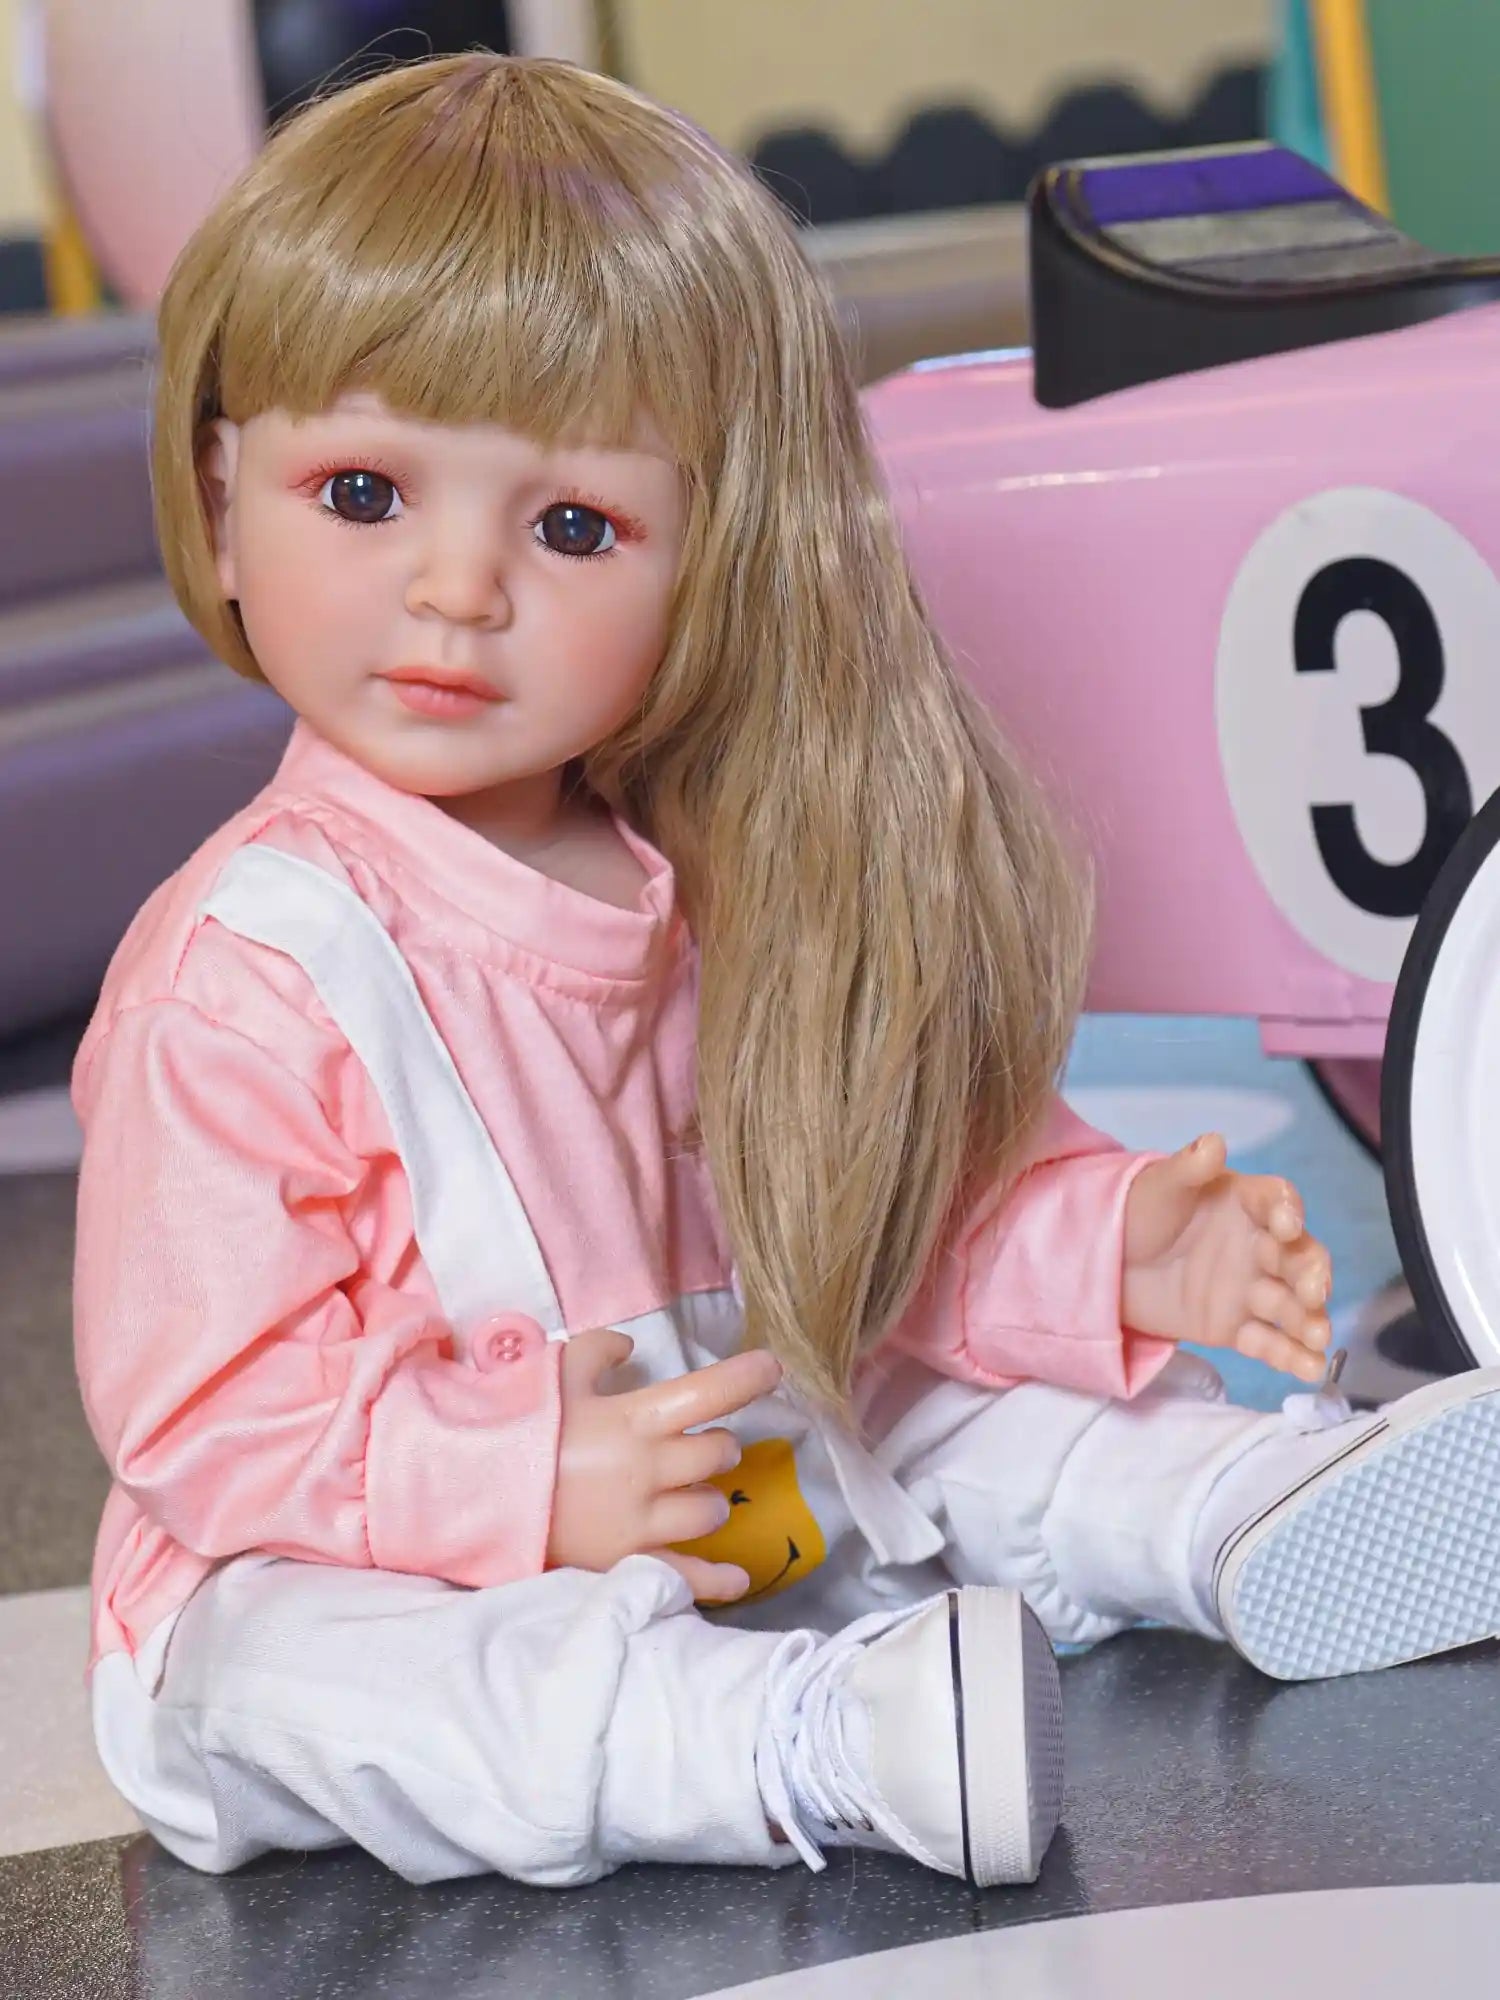 A realistic doll seated with a reflective expression, in a cozy pink and white outfit, beside a pink toy car.